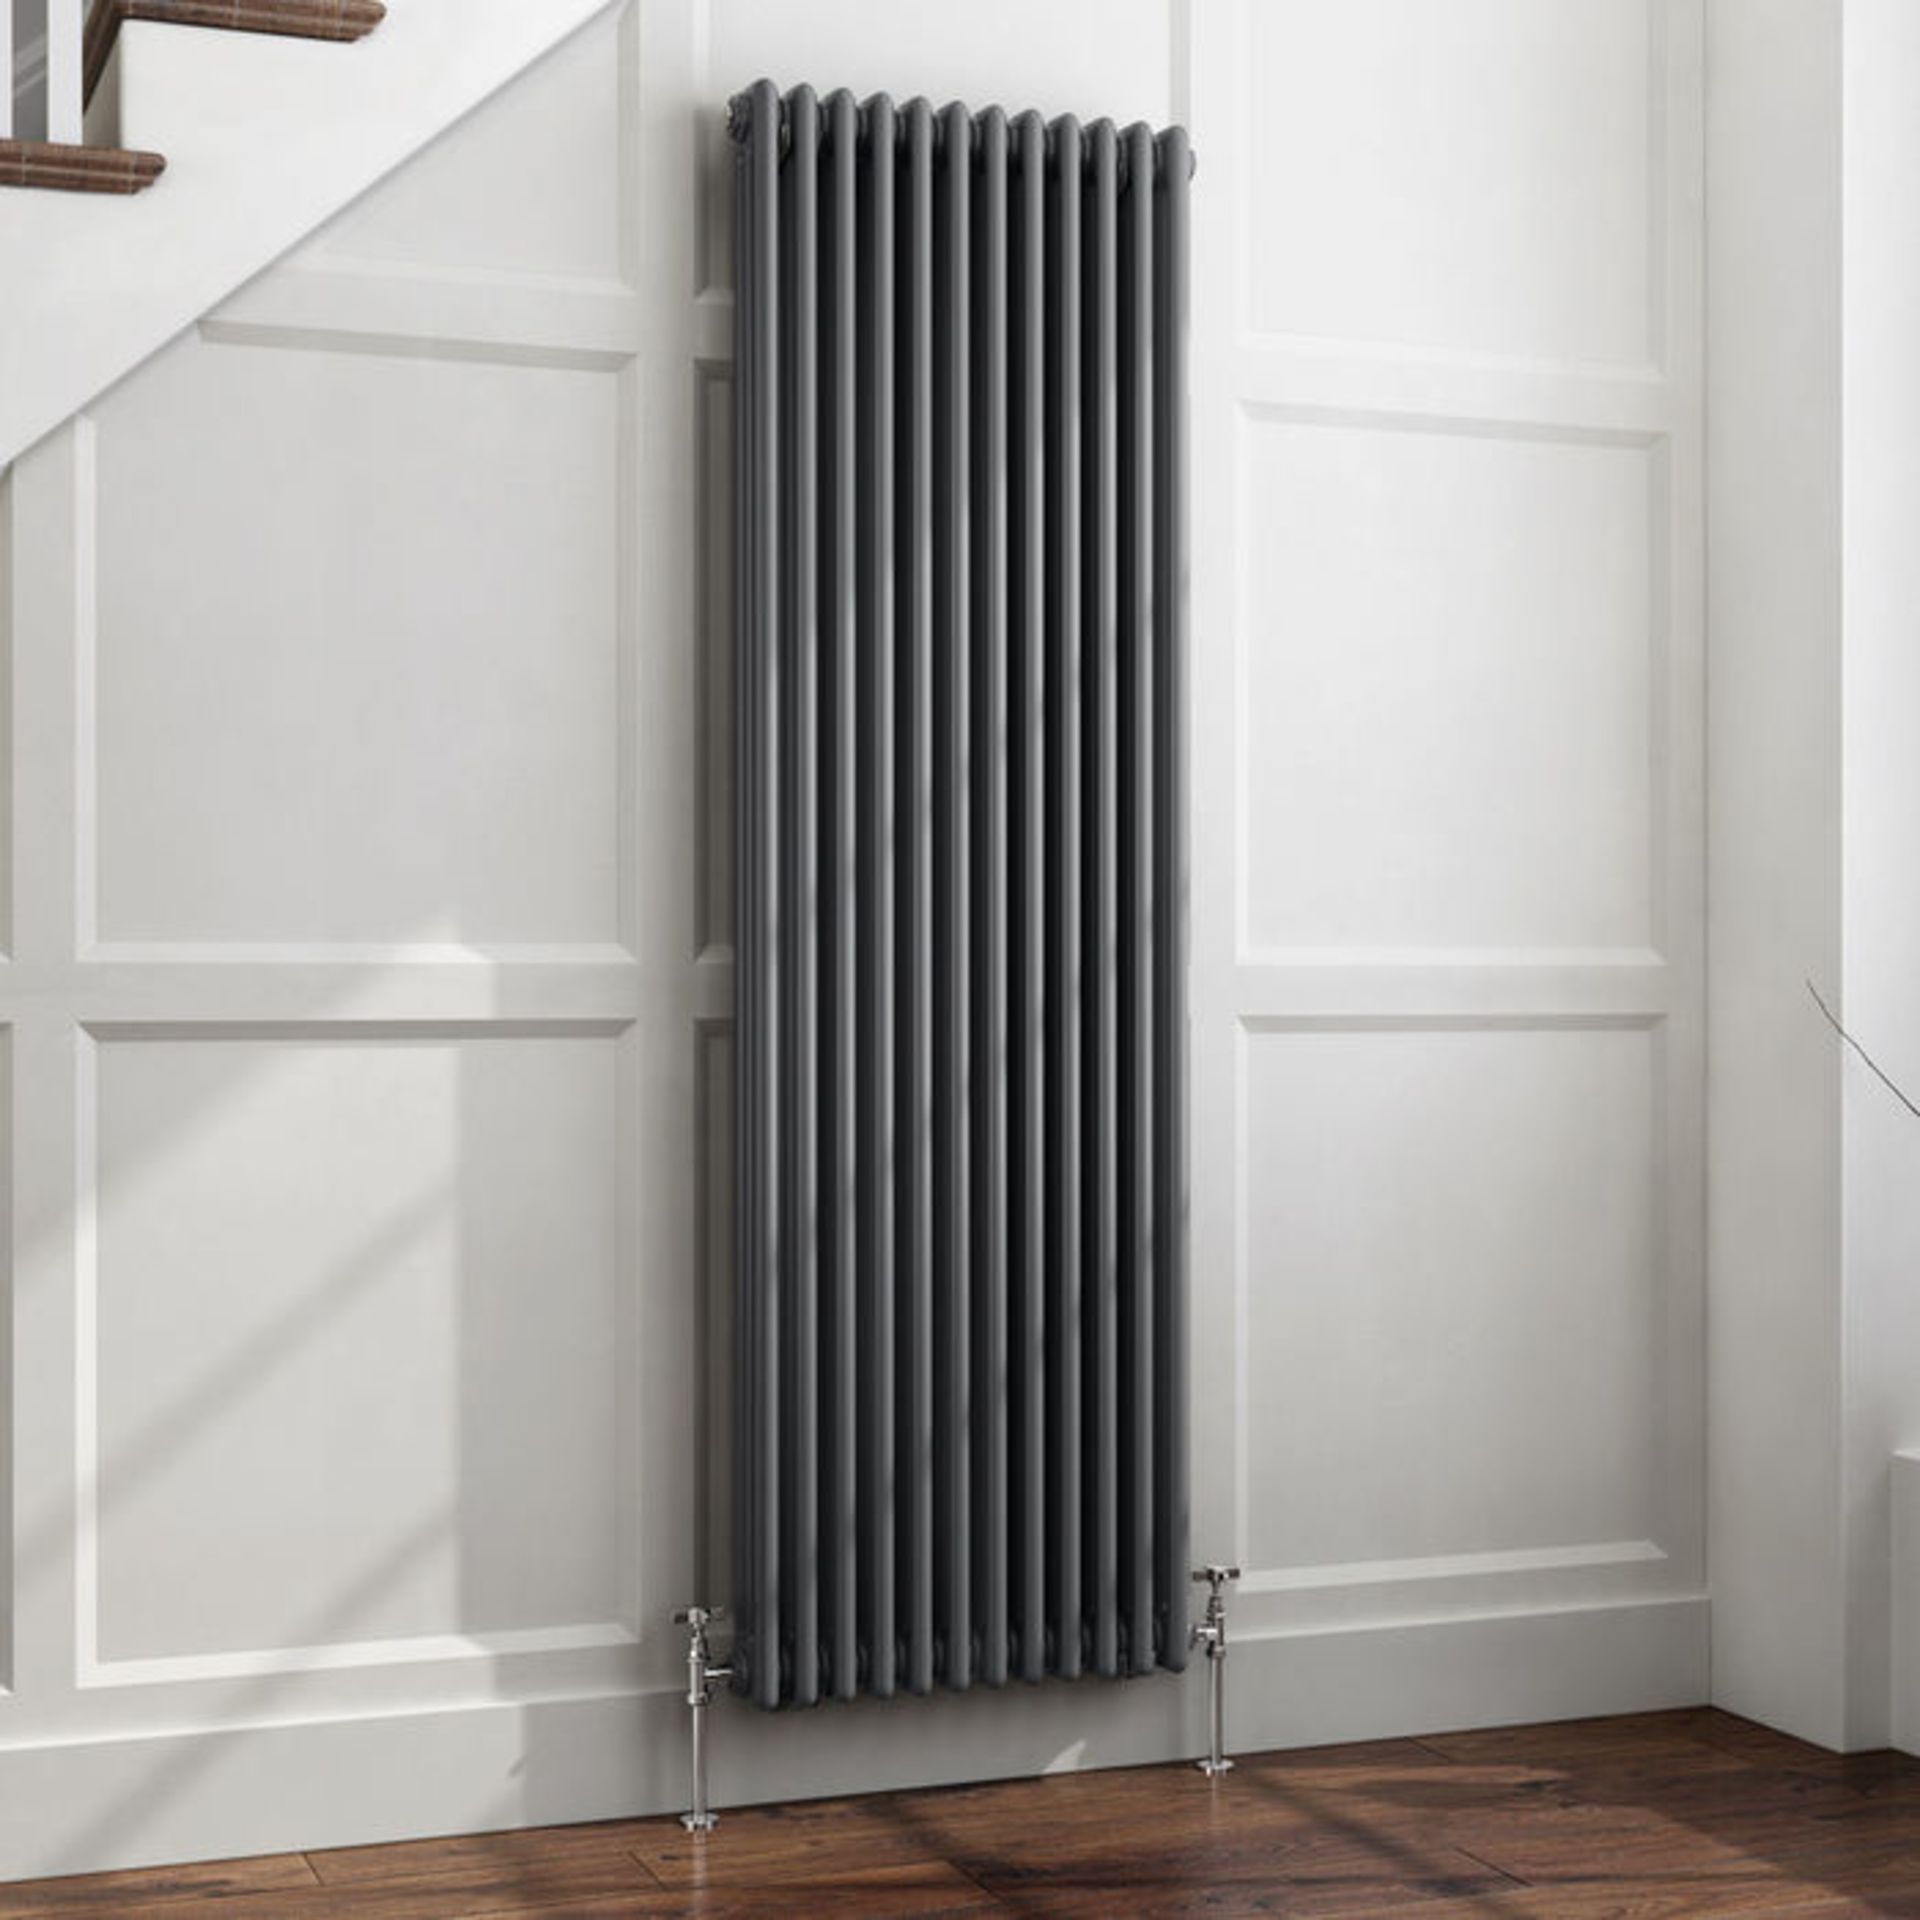 (CS19) 1800x558mm Anthracite Triple Panel Vertical Colosseum Traditional Radiator. RRP £619.99. Made - Image 2 of 4